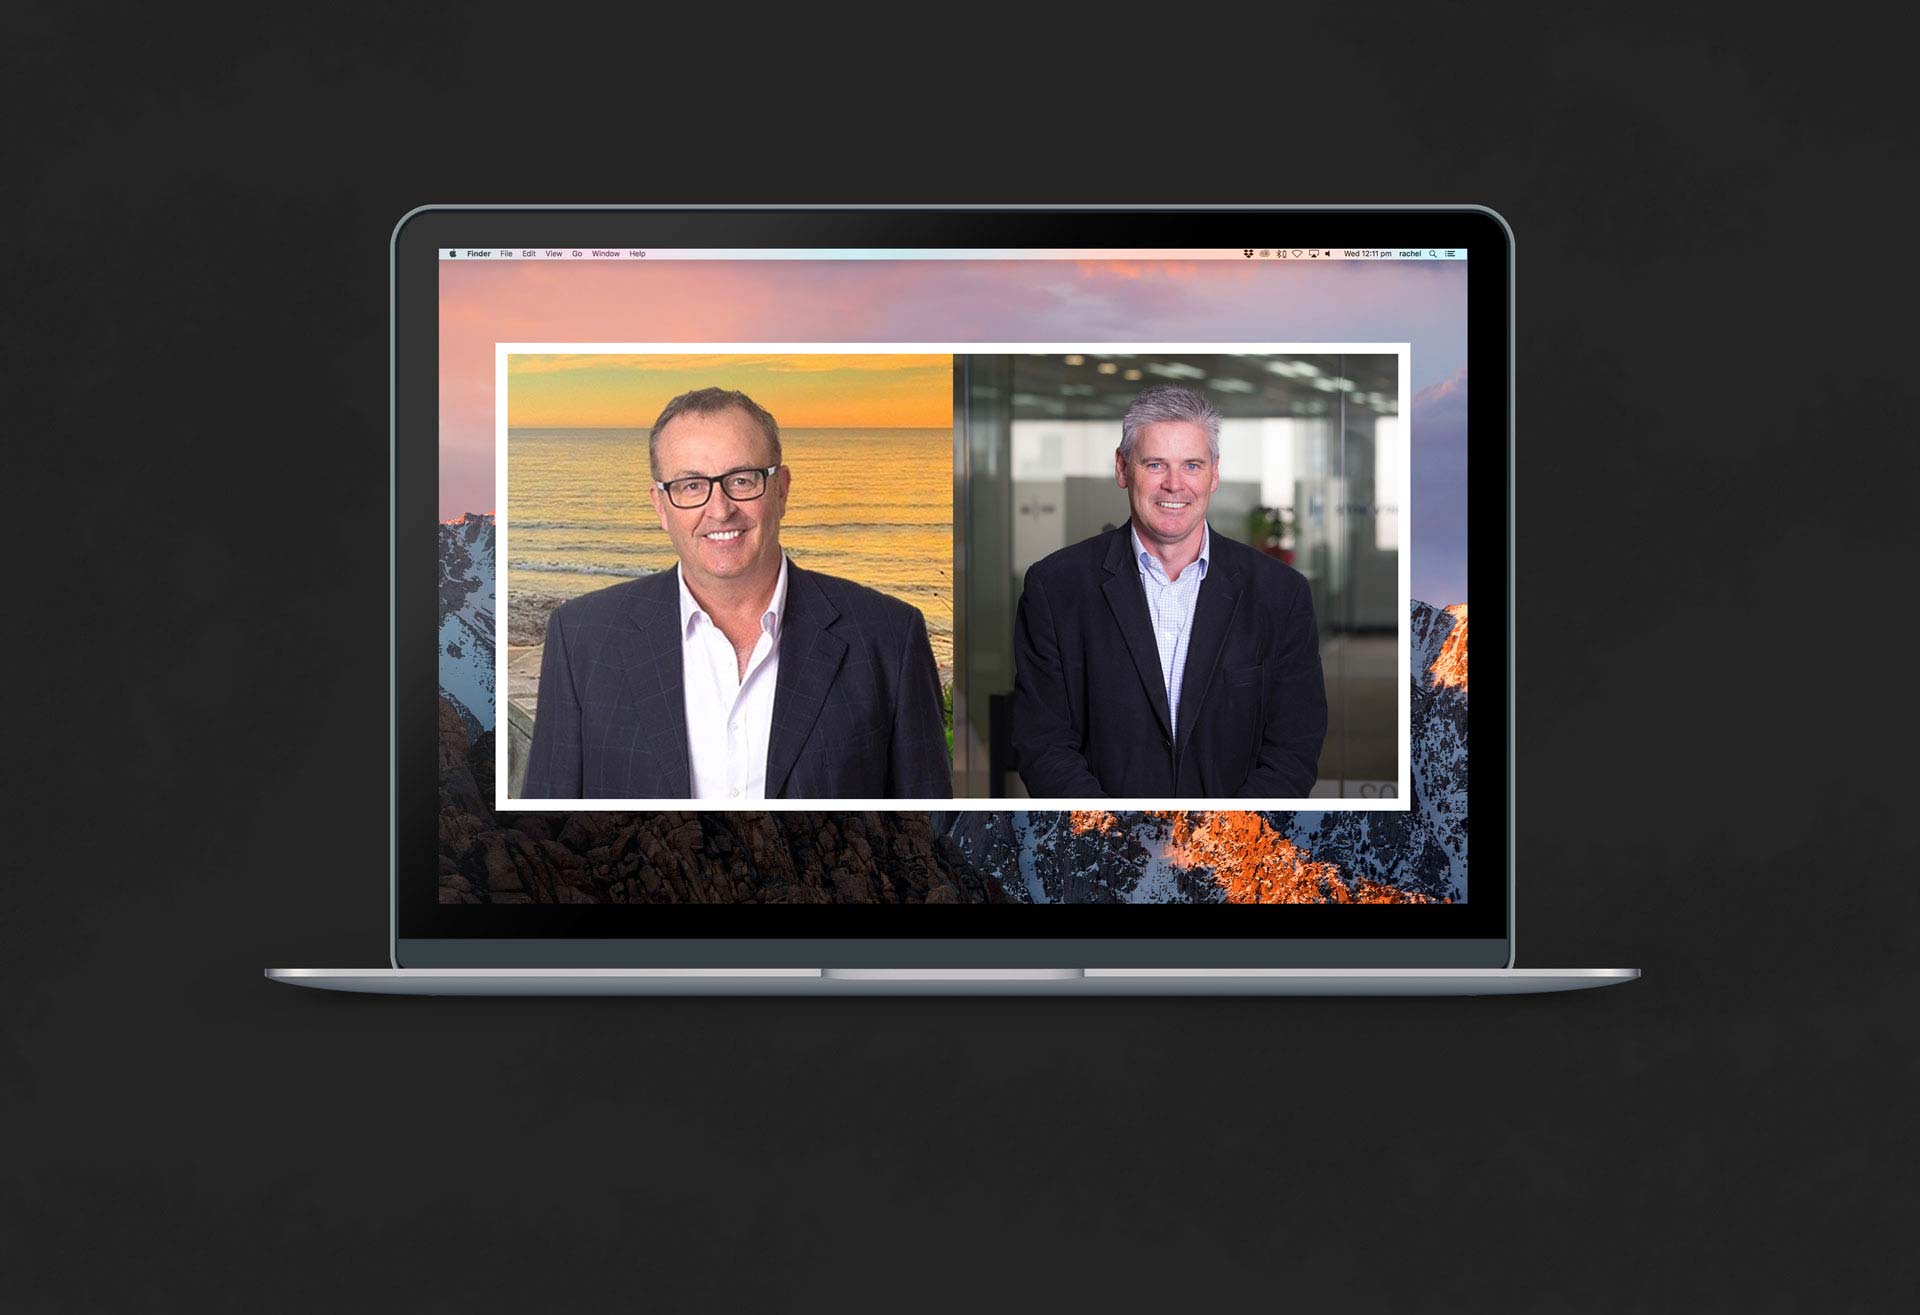 Chris Smith and Damian Kernahan's images side-by-side on a laptop screen, showing them together in Chris Smith Show Interview on 2GB.